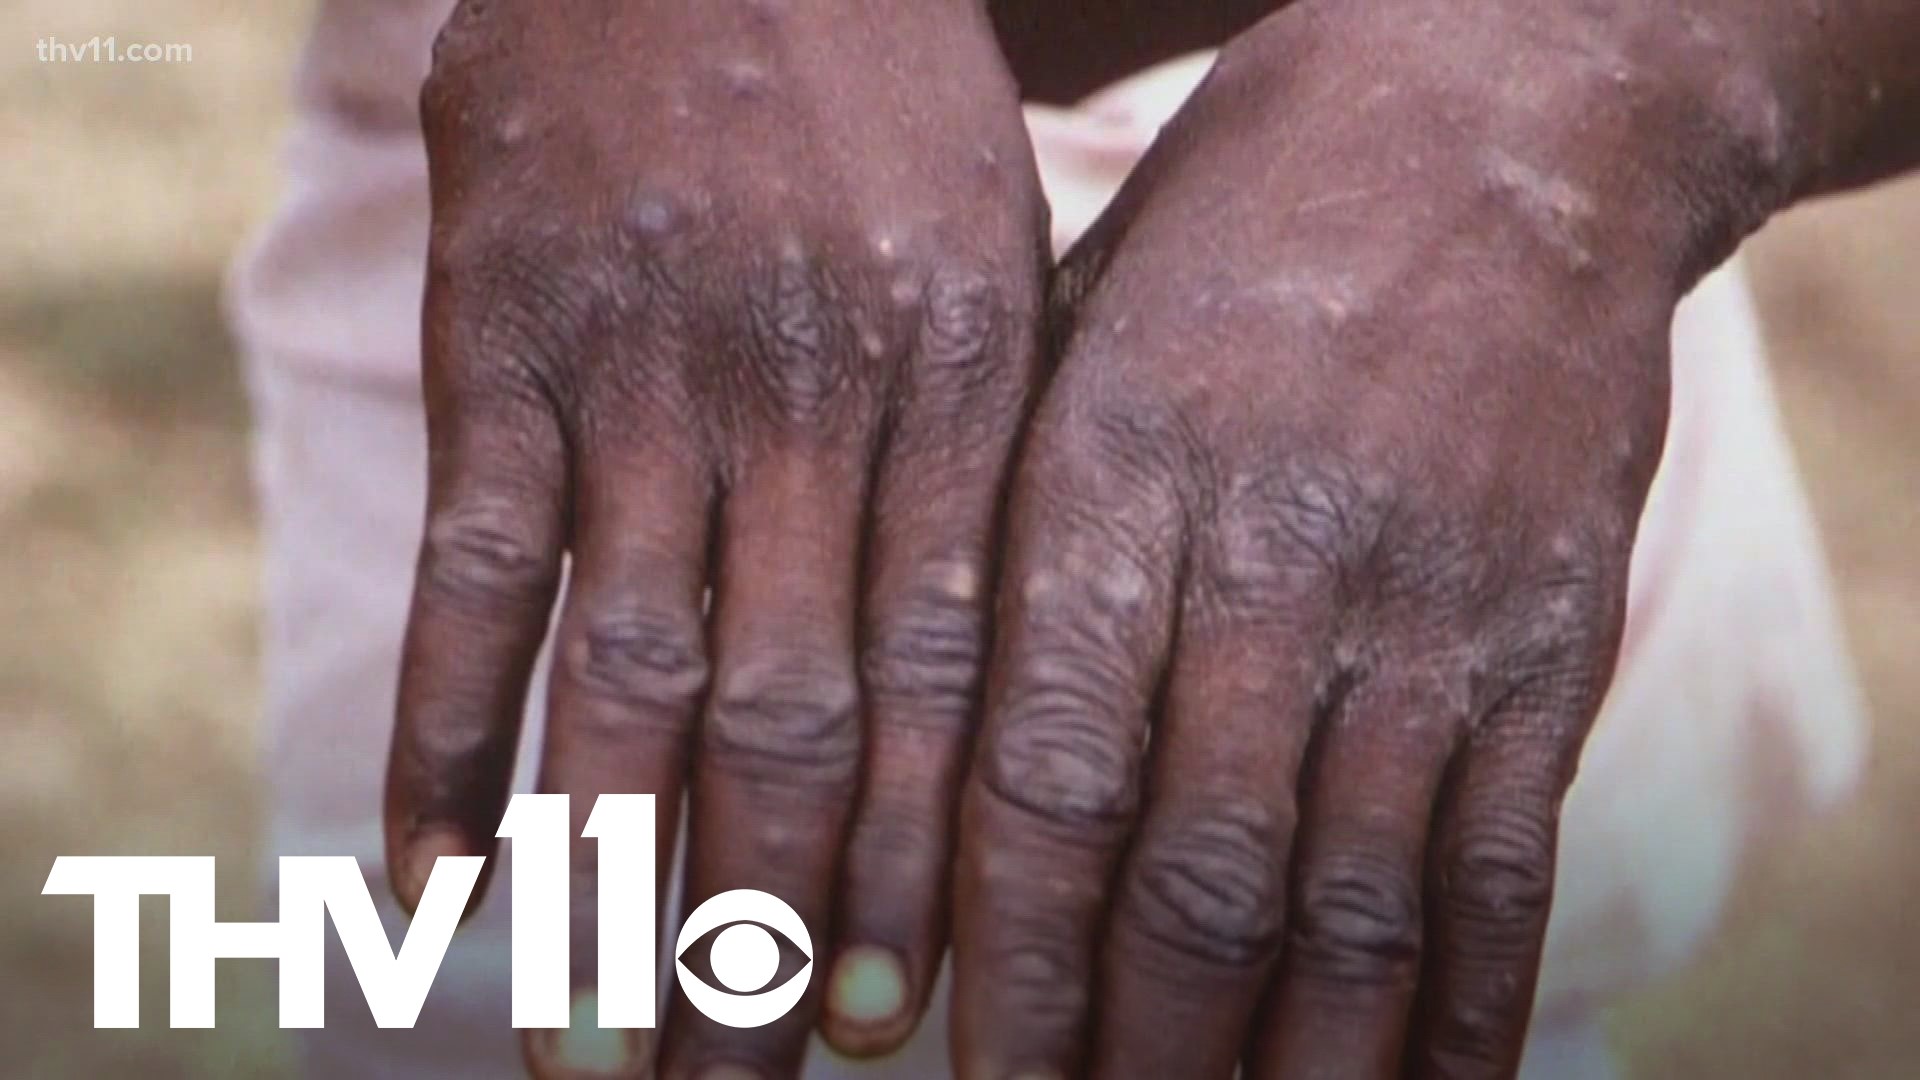 After a case of Monkeypox was confirmed in a Little Rock school, parents have been left wondering if they should be more concerned for their kids.